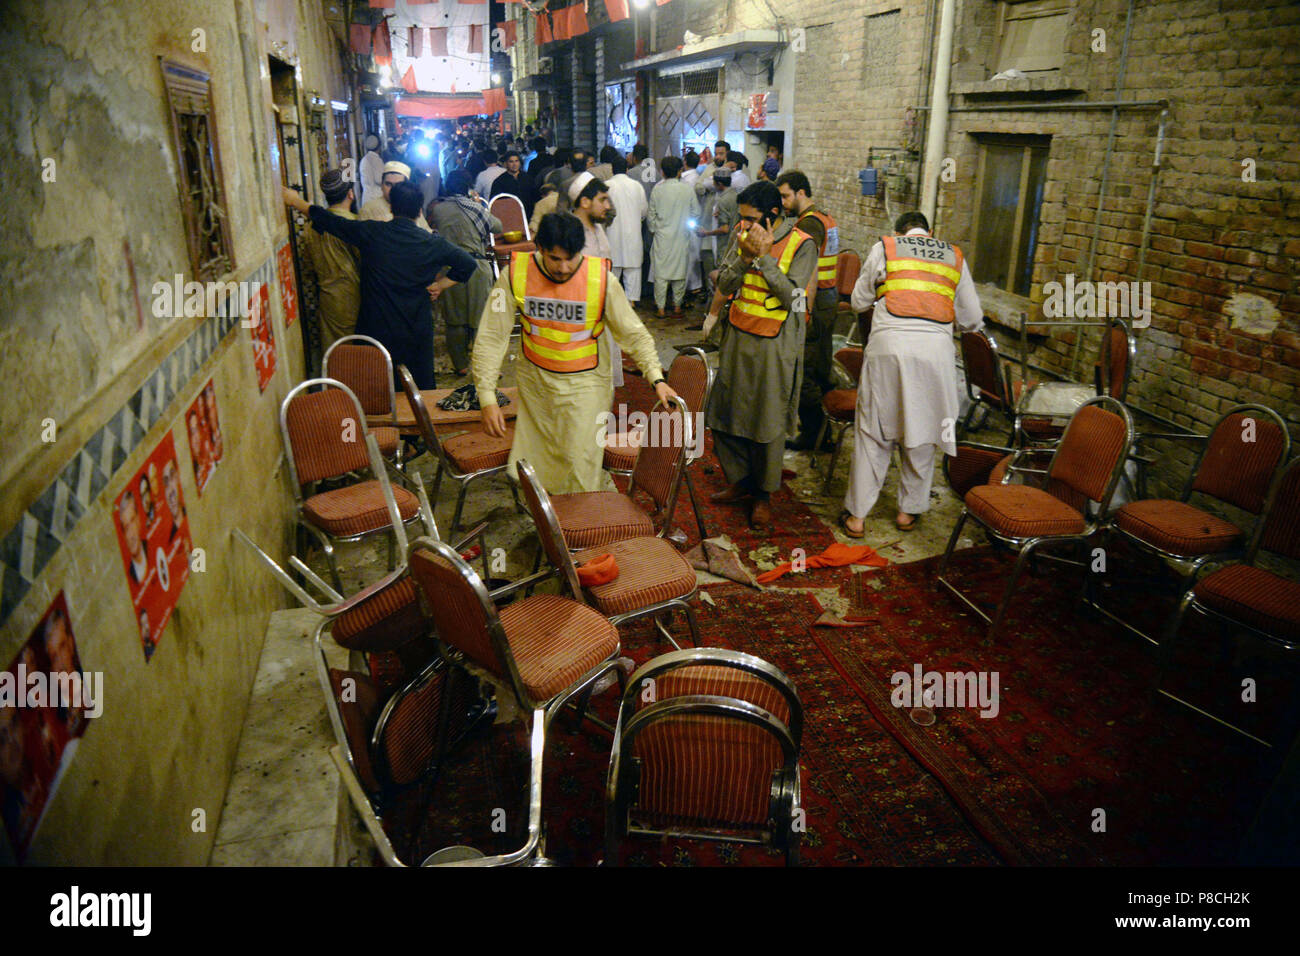 Peshawar, Pakistan. 10th July, 2018. Rescuers work at the blast site in Peshawar, northwest Pakistan, on July 10, 2018. At least 13 people were killed and dozens of others injured in a blast that hit a public gathering of a political party in Pakistan's northwest provincial capital of Peshawar on Tuesday night, local media reported. Credit: Umar Qayyum/Xinhua/Alamy Live News Stock Photo